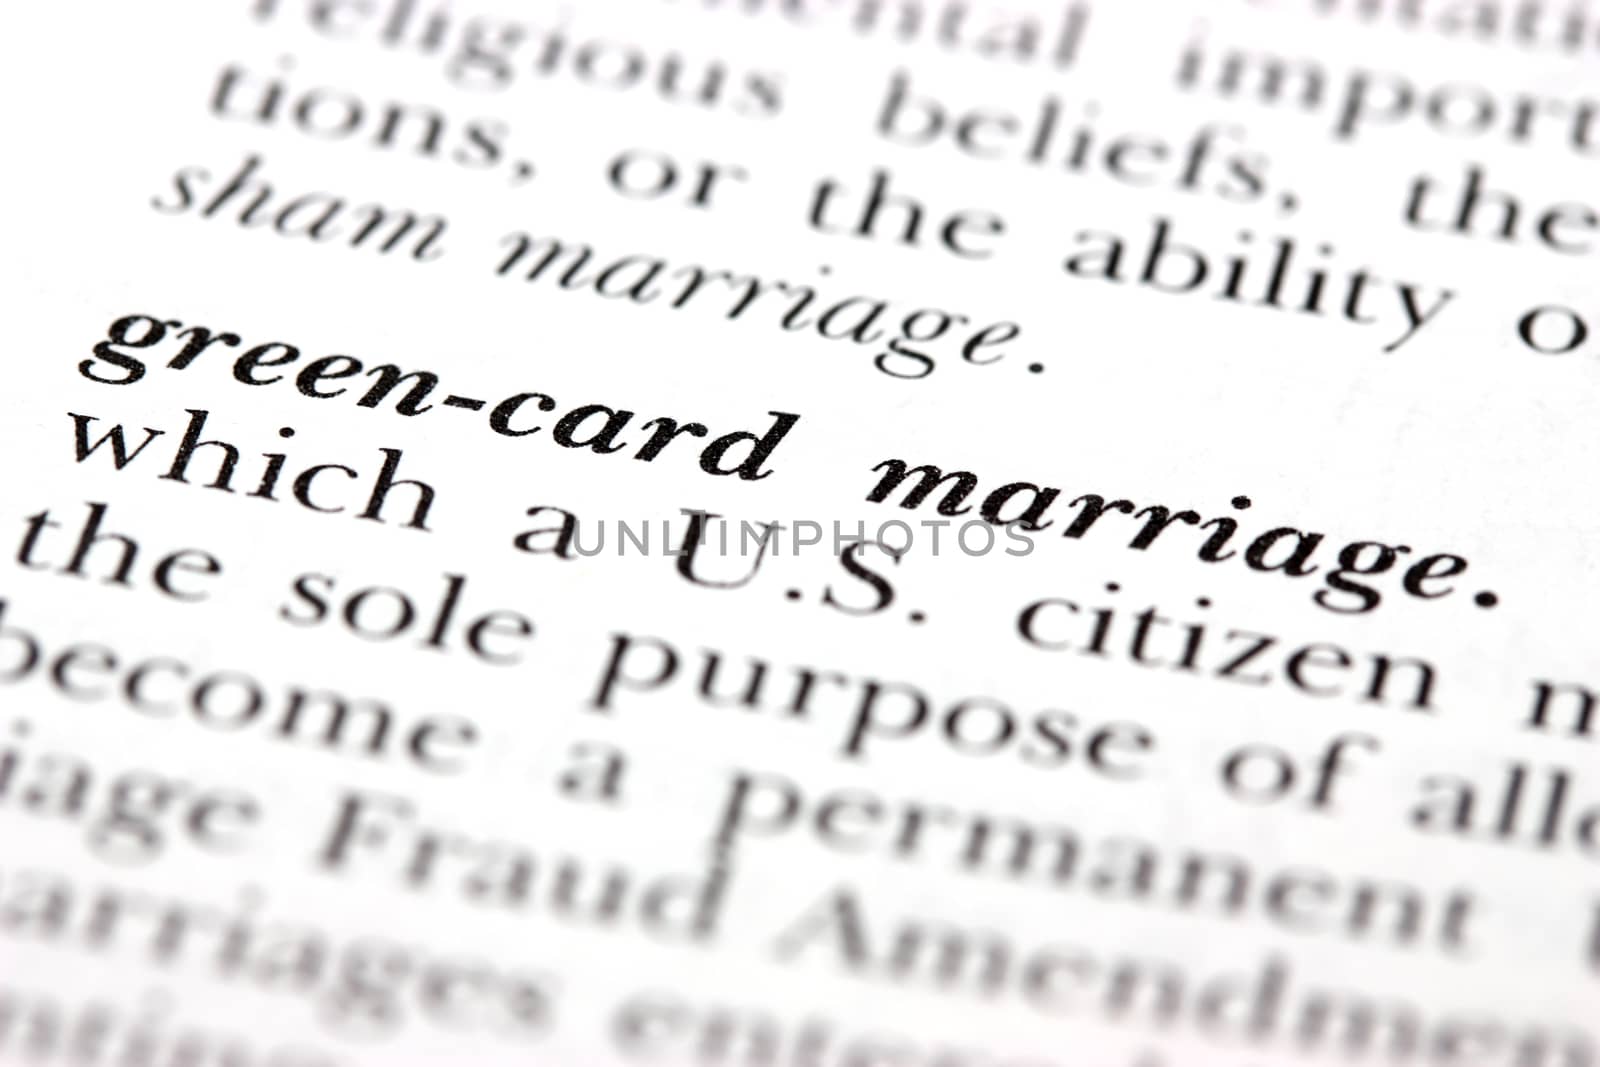 Dictionary word Green-card marriage